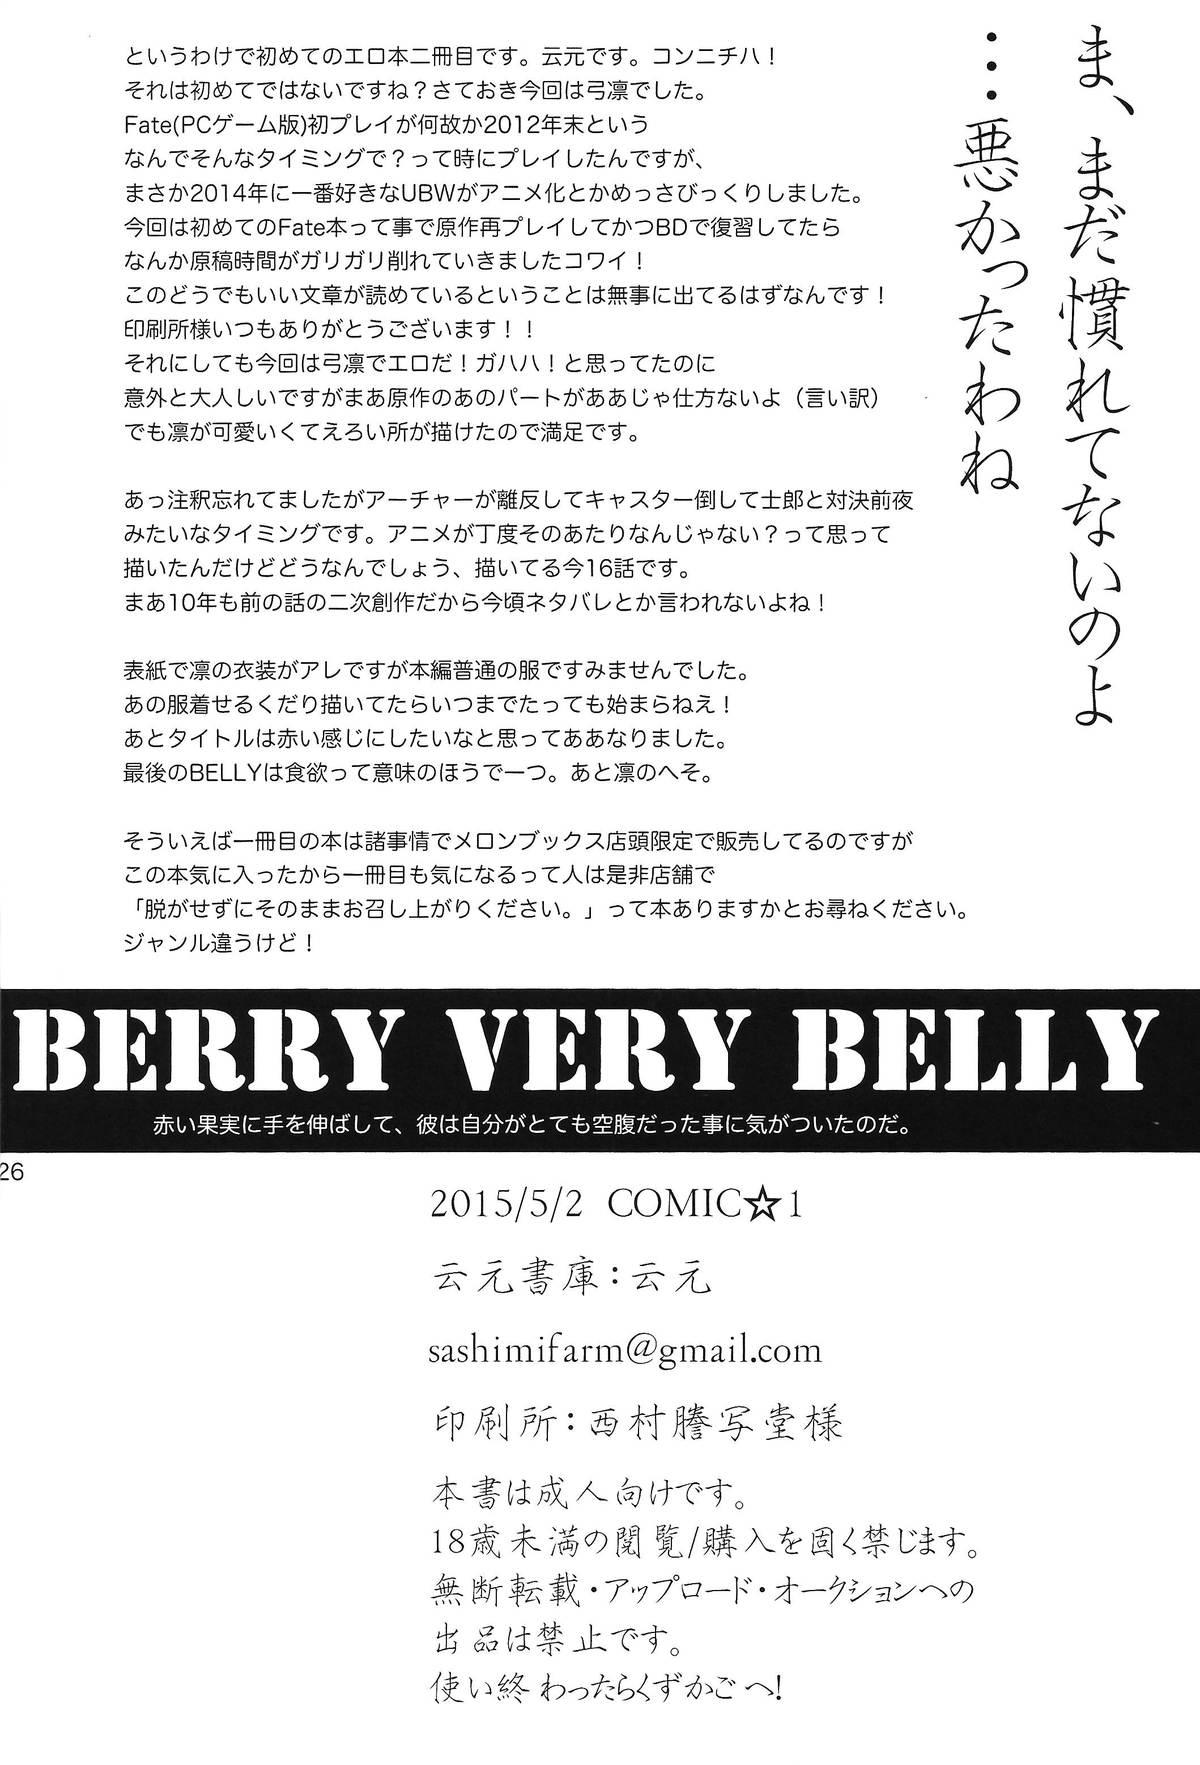 Cuminmouth BERRY VERY BELLY - Fate stay night Bukkake - Page 24